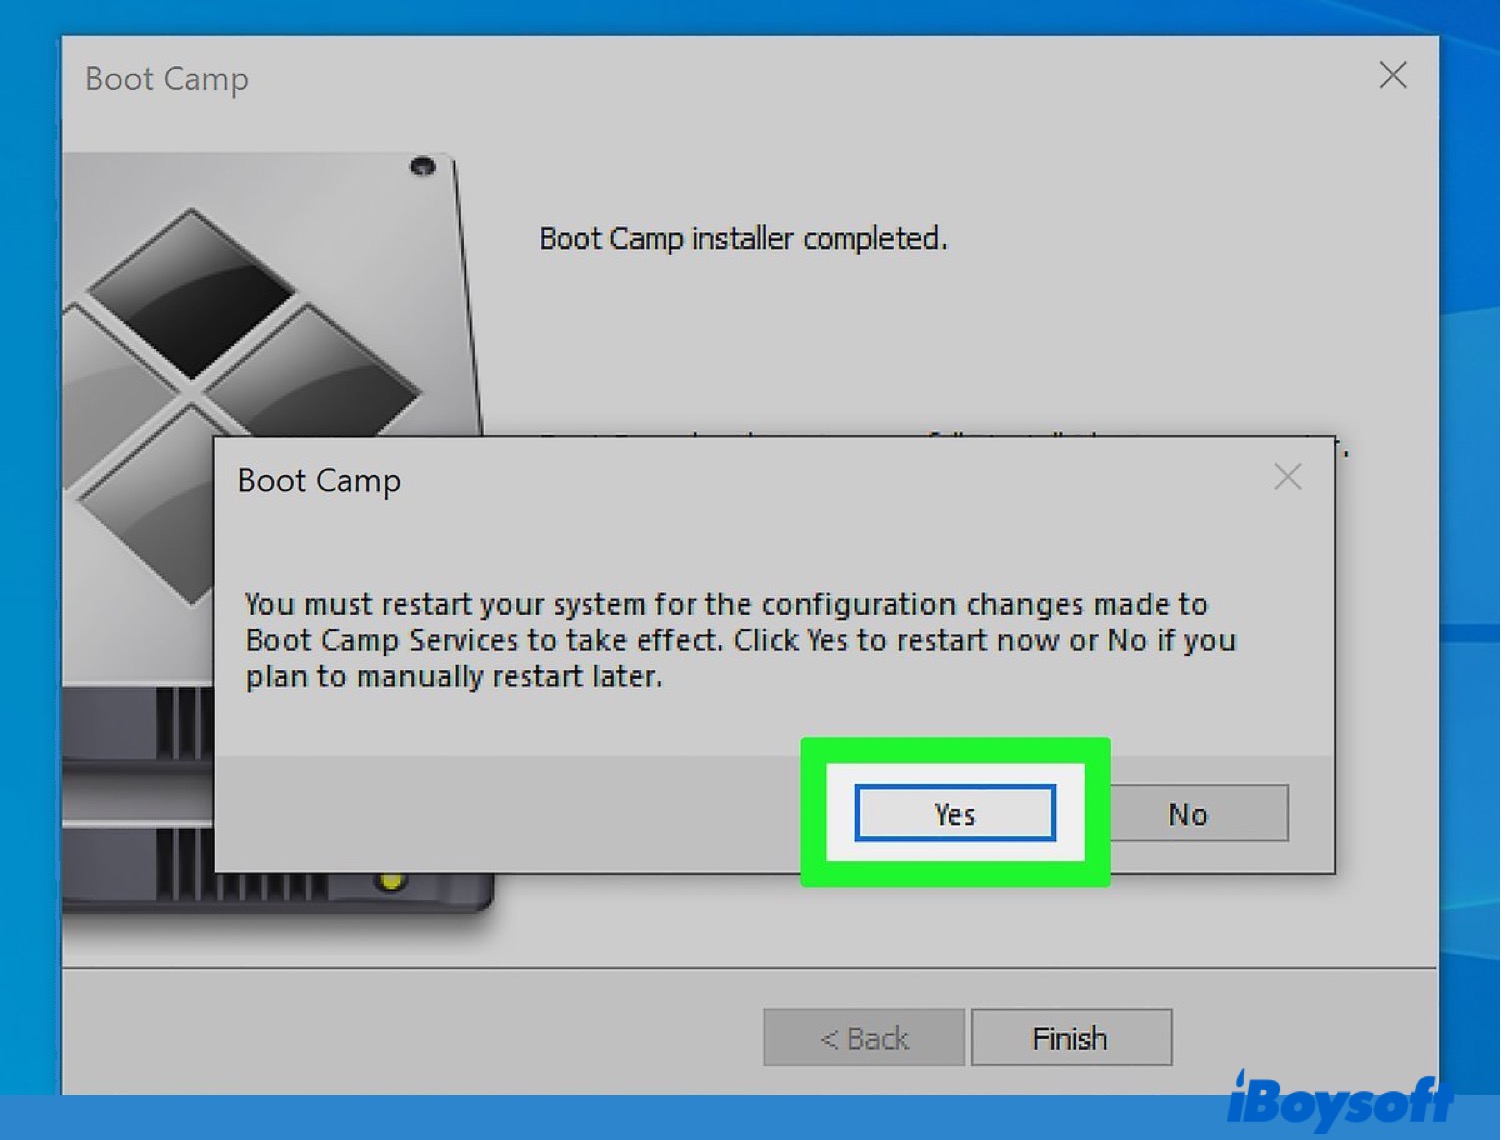 restart Mac to complete the Boot Camp installer